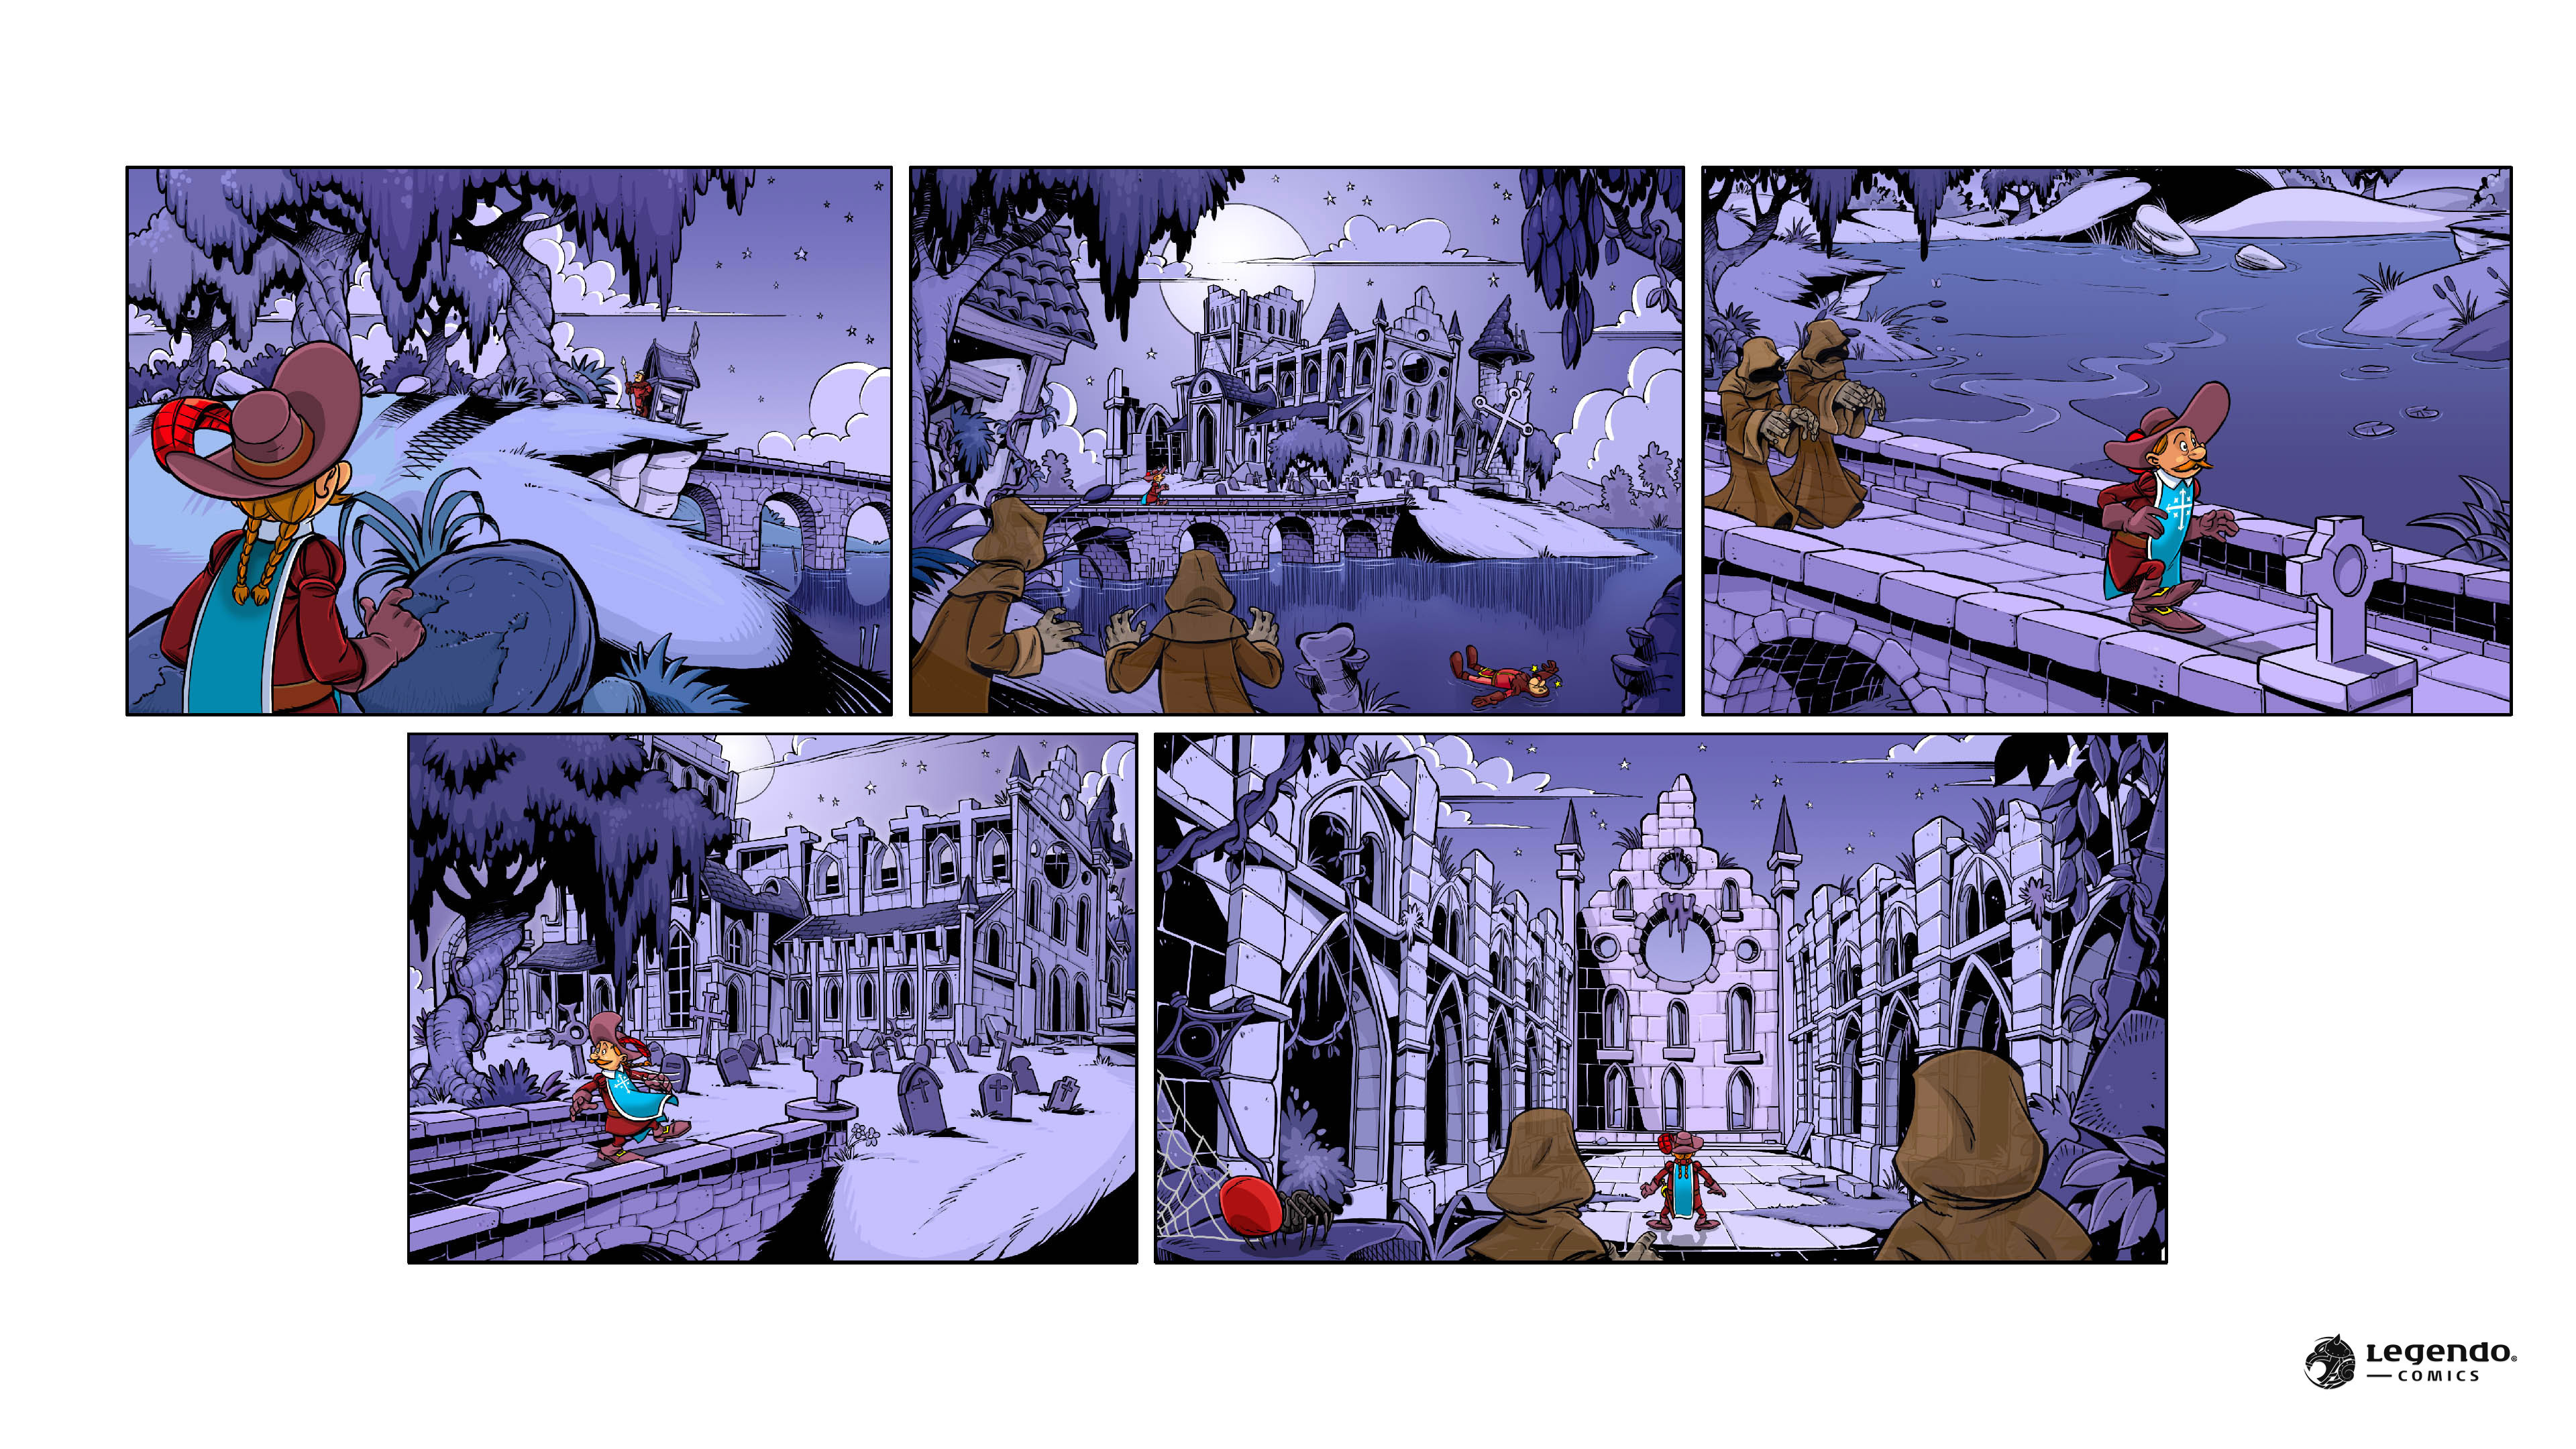 Unannounced ‘Muskerados™‘ project. Porthos returns once more to Count Xavier’s dark abbey in 1600s France.  Uses Hergé’s “Ligne Claire” comic book style that resulted in the French comic book look as seen in TinTin, Lucky Luke, Asterix, Spirou, and more.